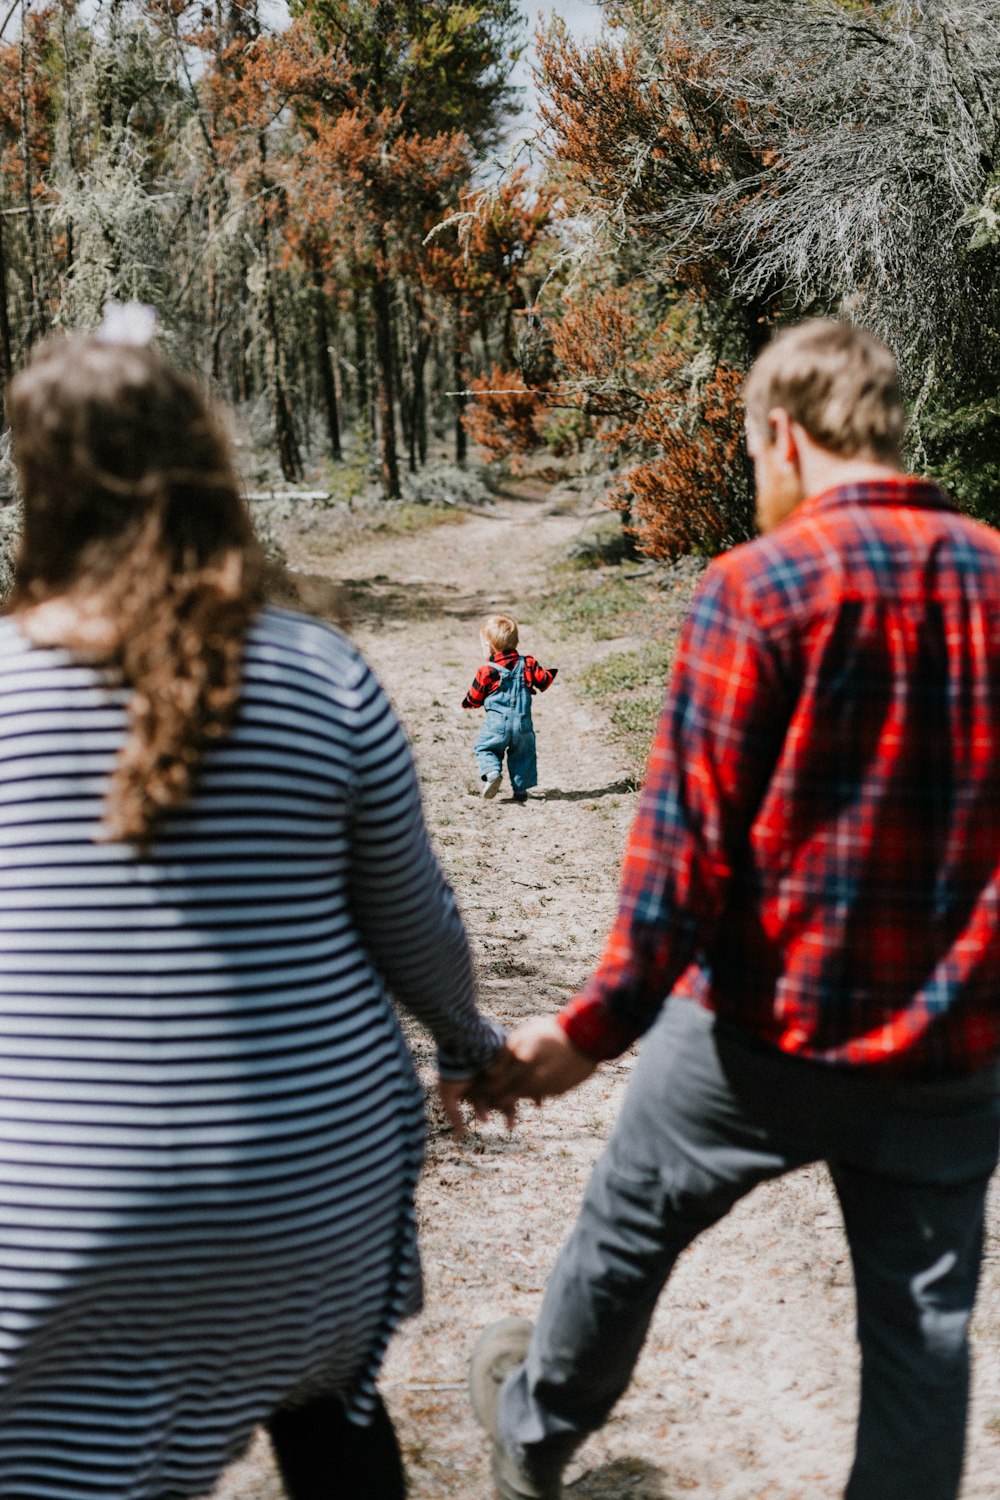 a man and a woman holding hands while walking down a dirt road